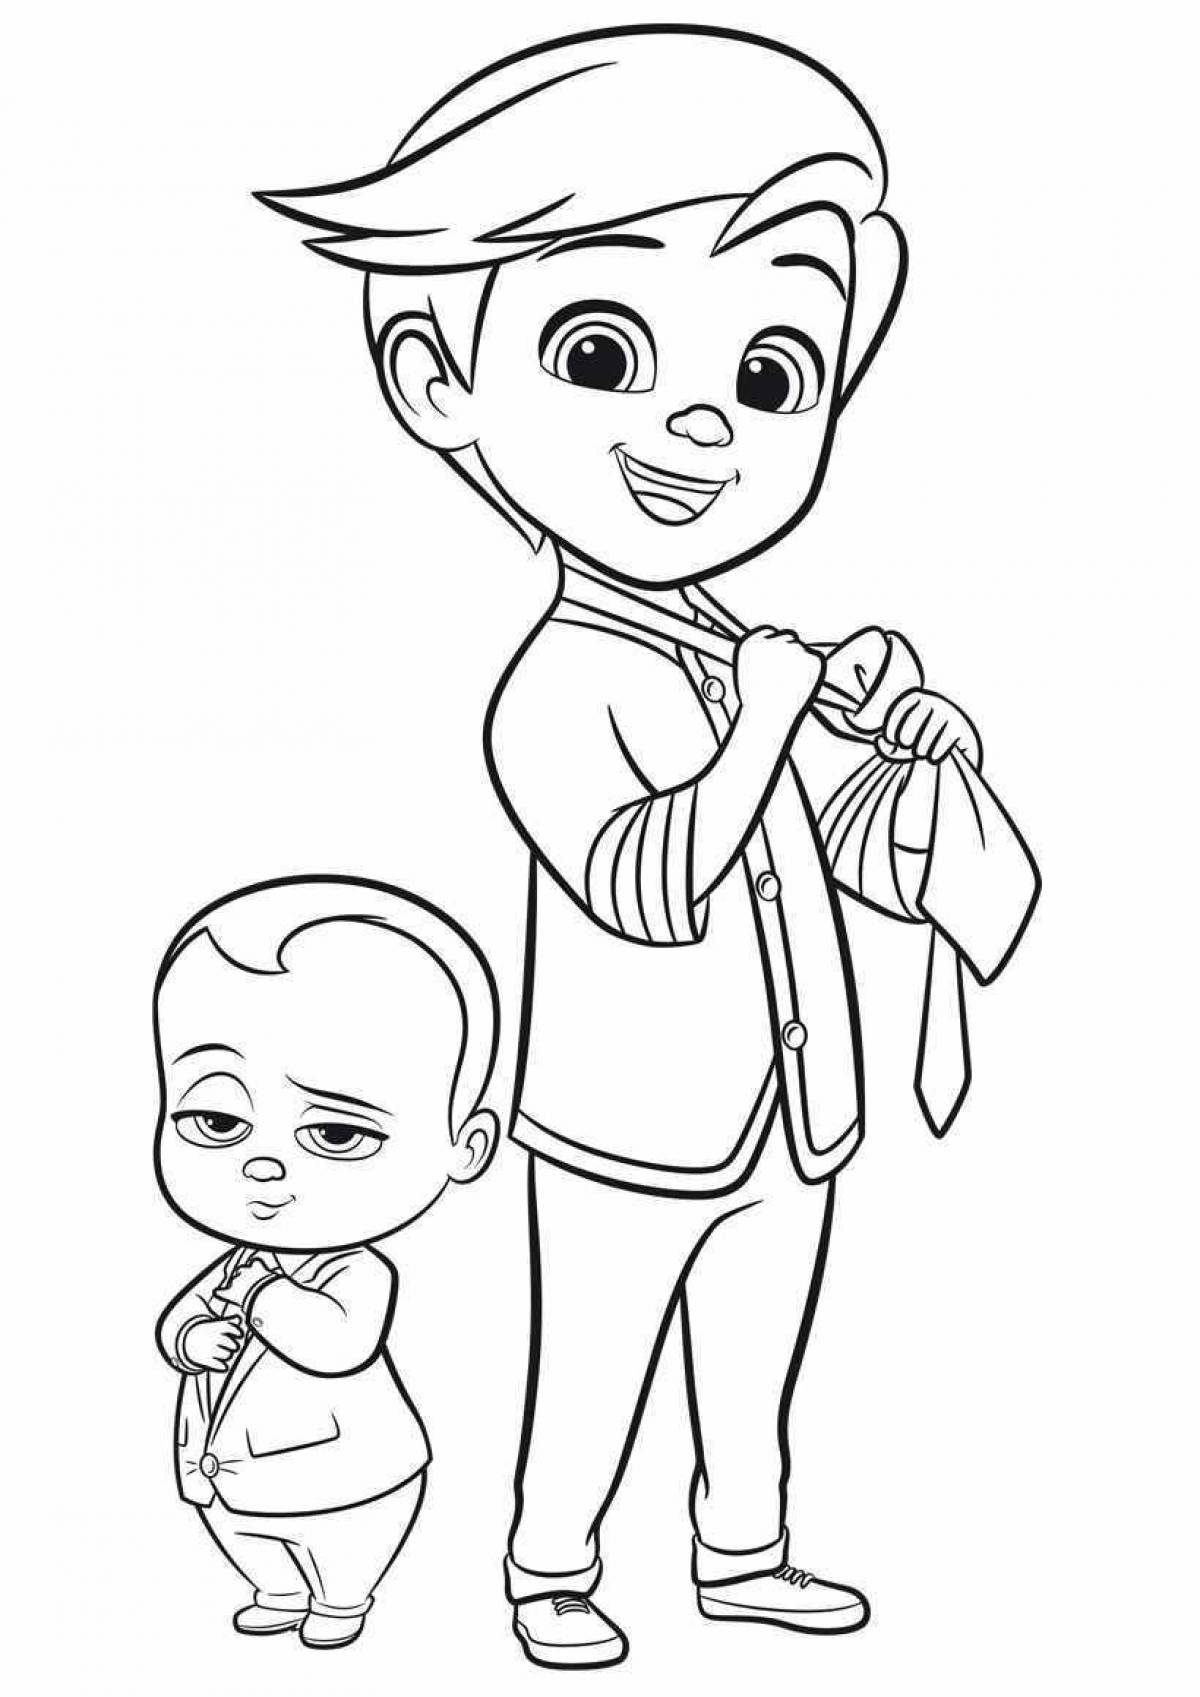 Boss baby live coloring